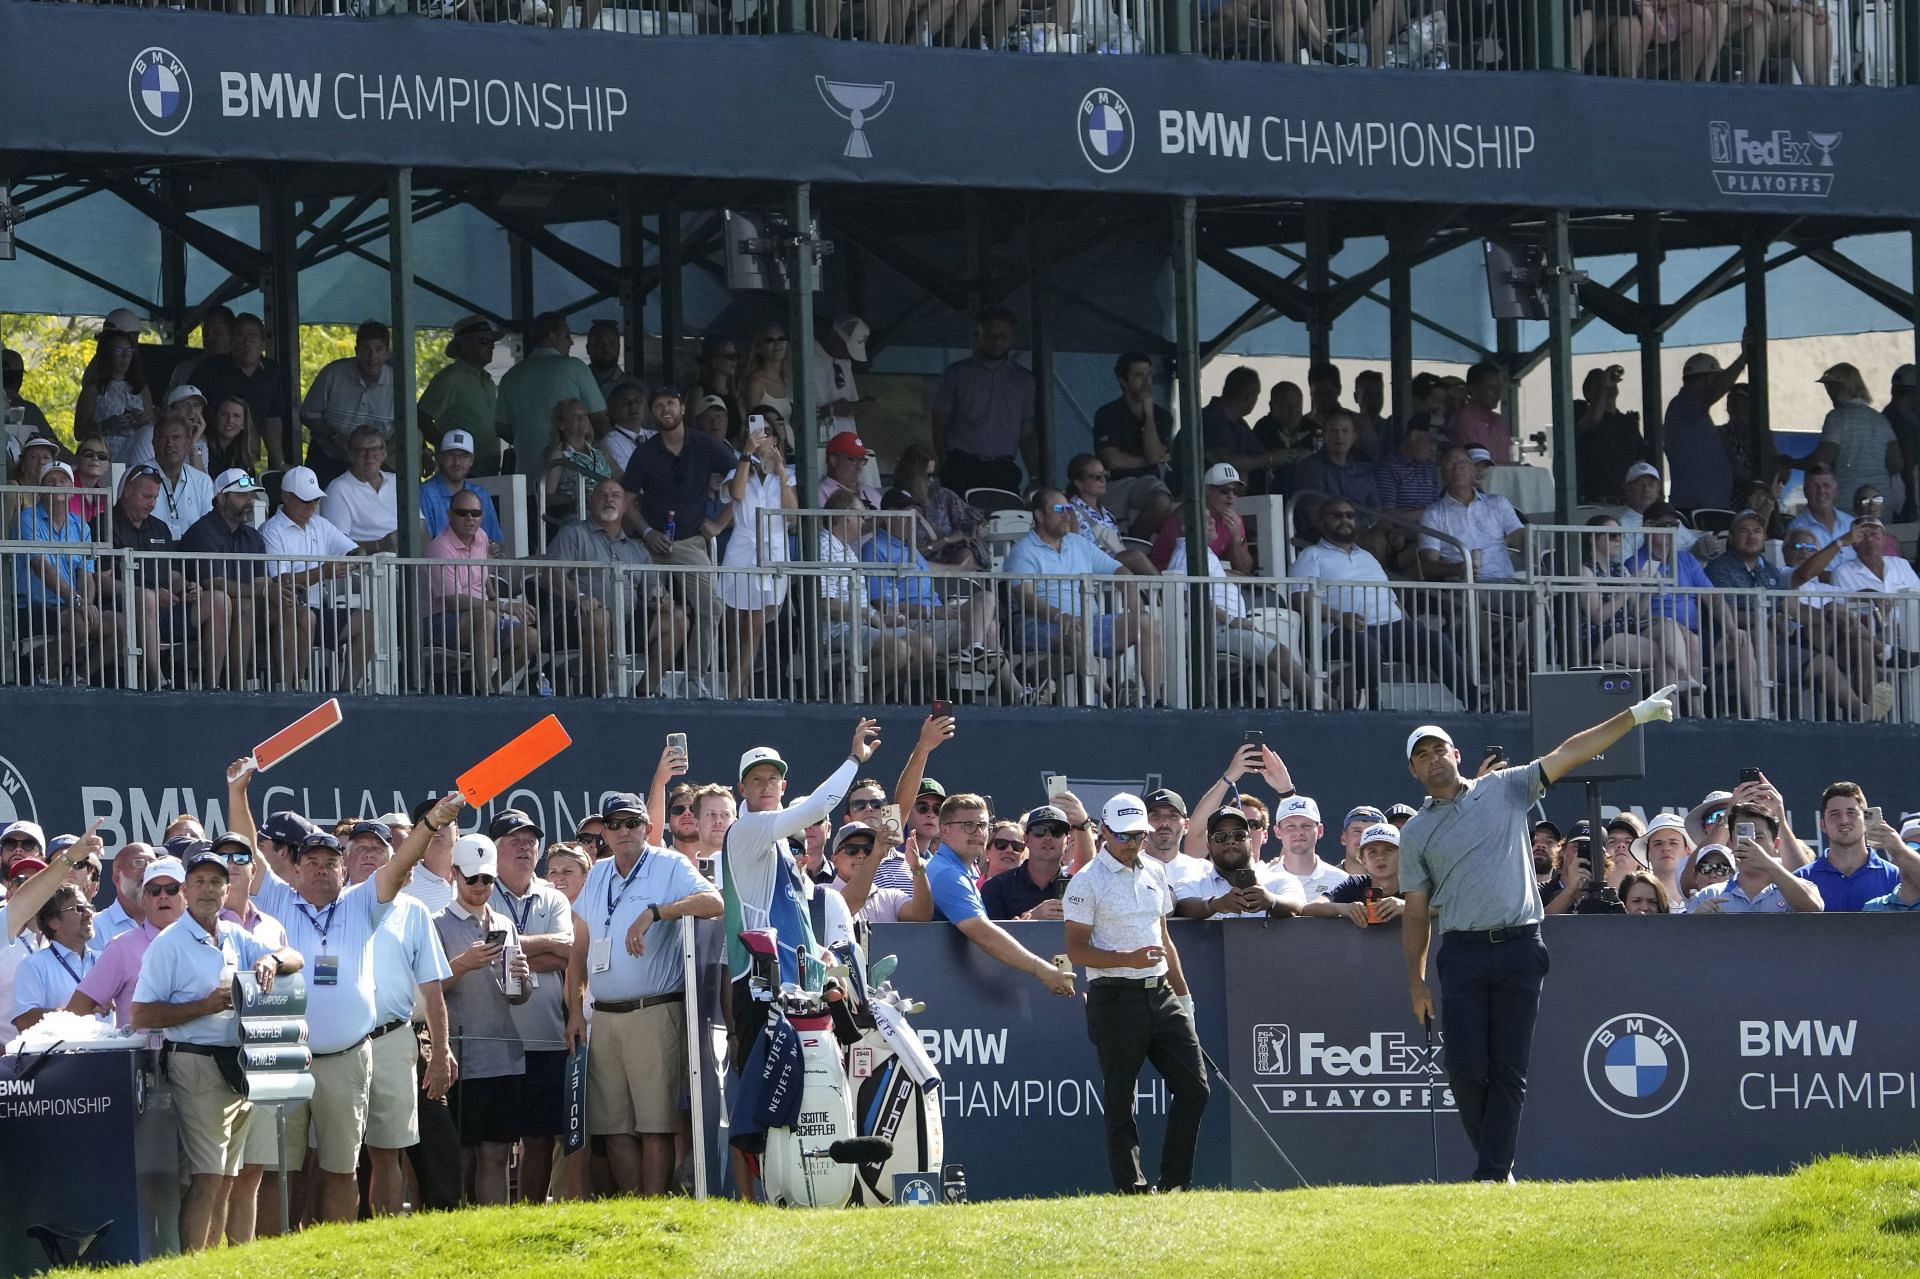 BMW Championship purse breakdown How much will each golfer earn from